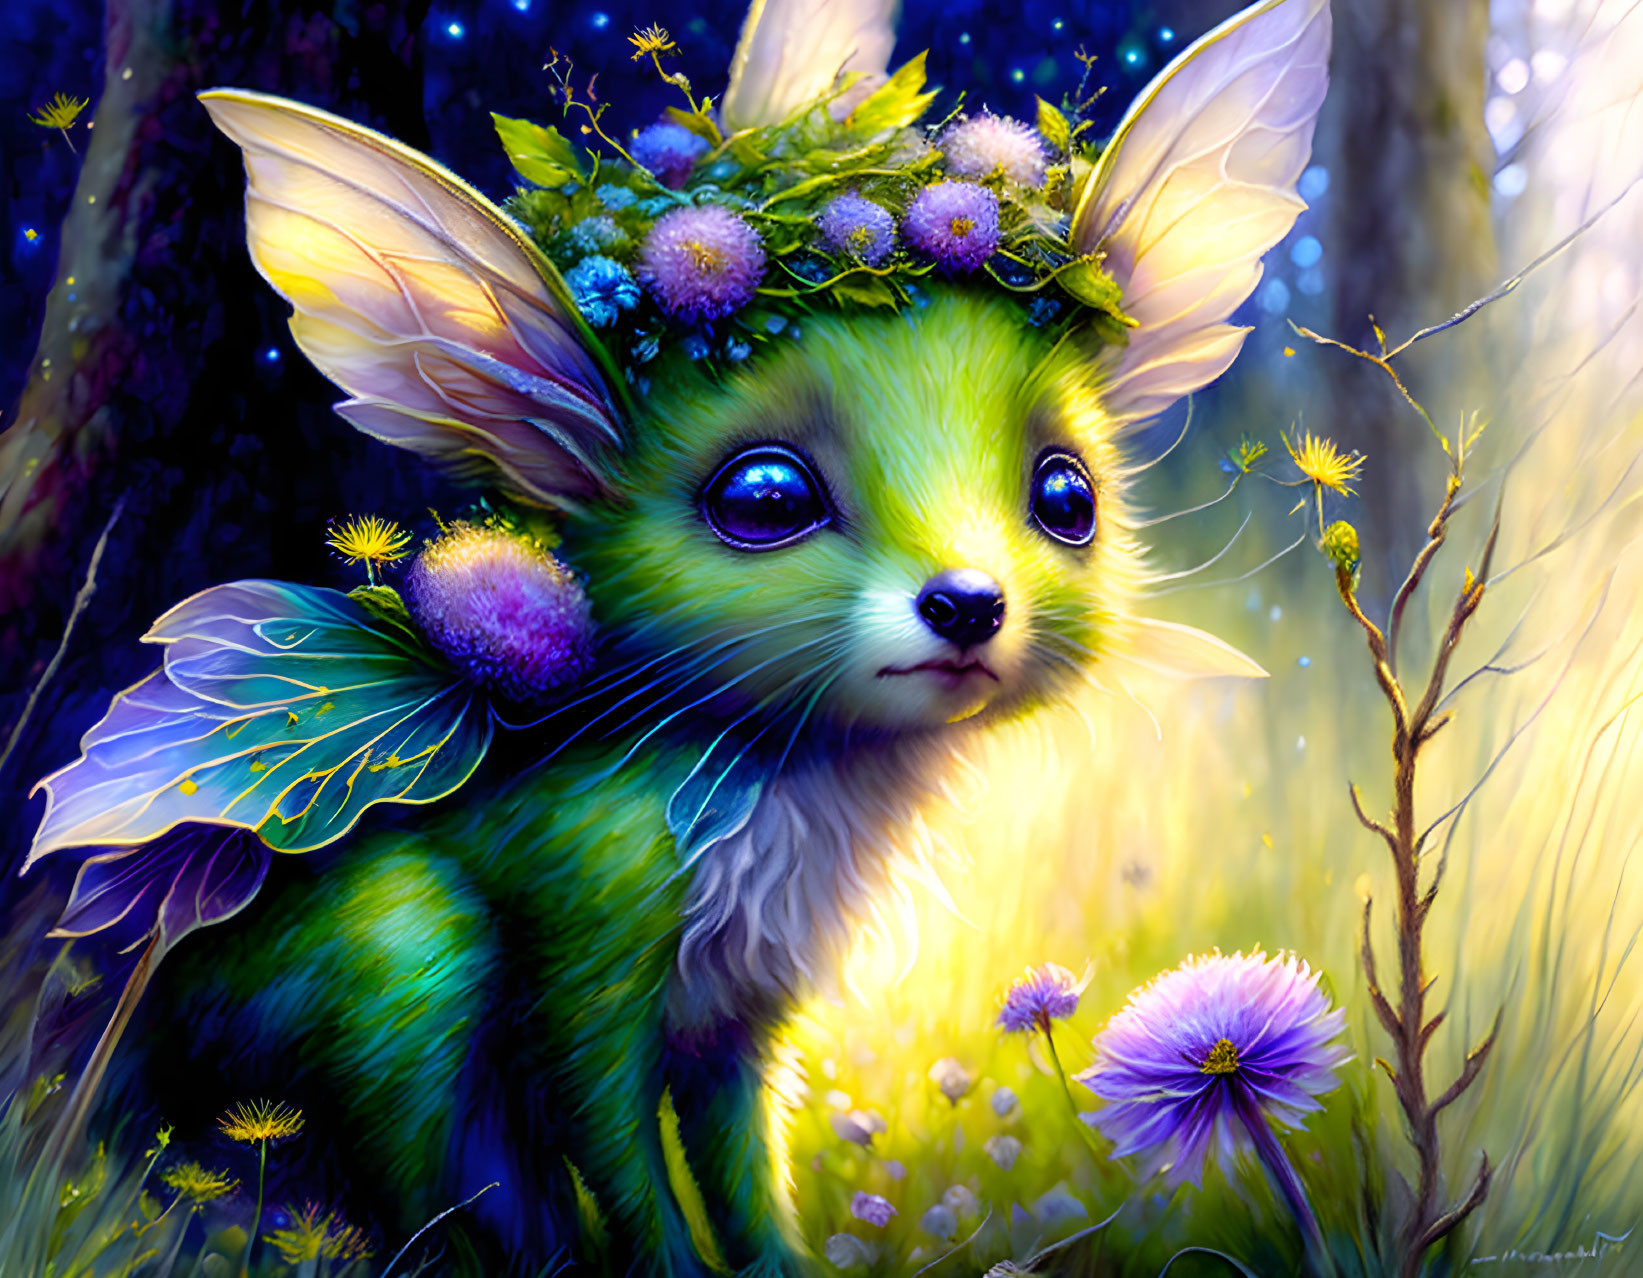 Enchanted forest scene with fawn-like creature, floral crown, and wings